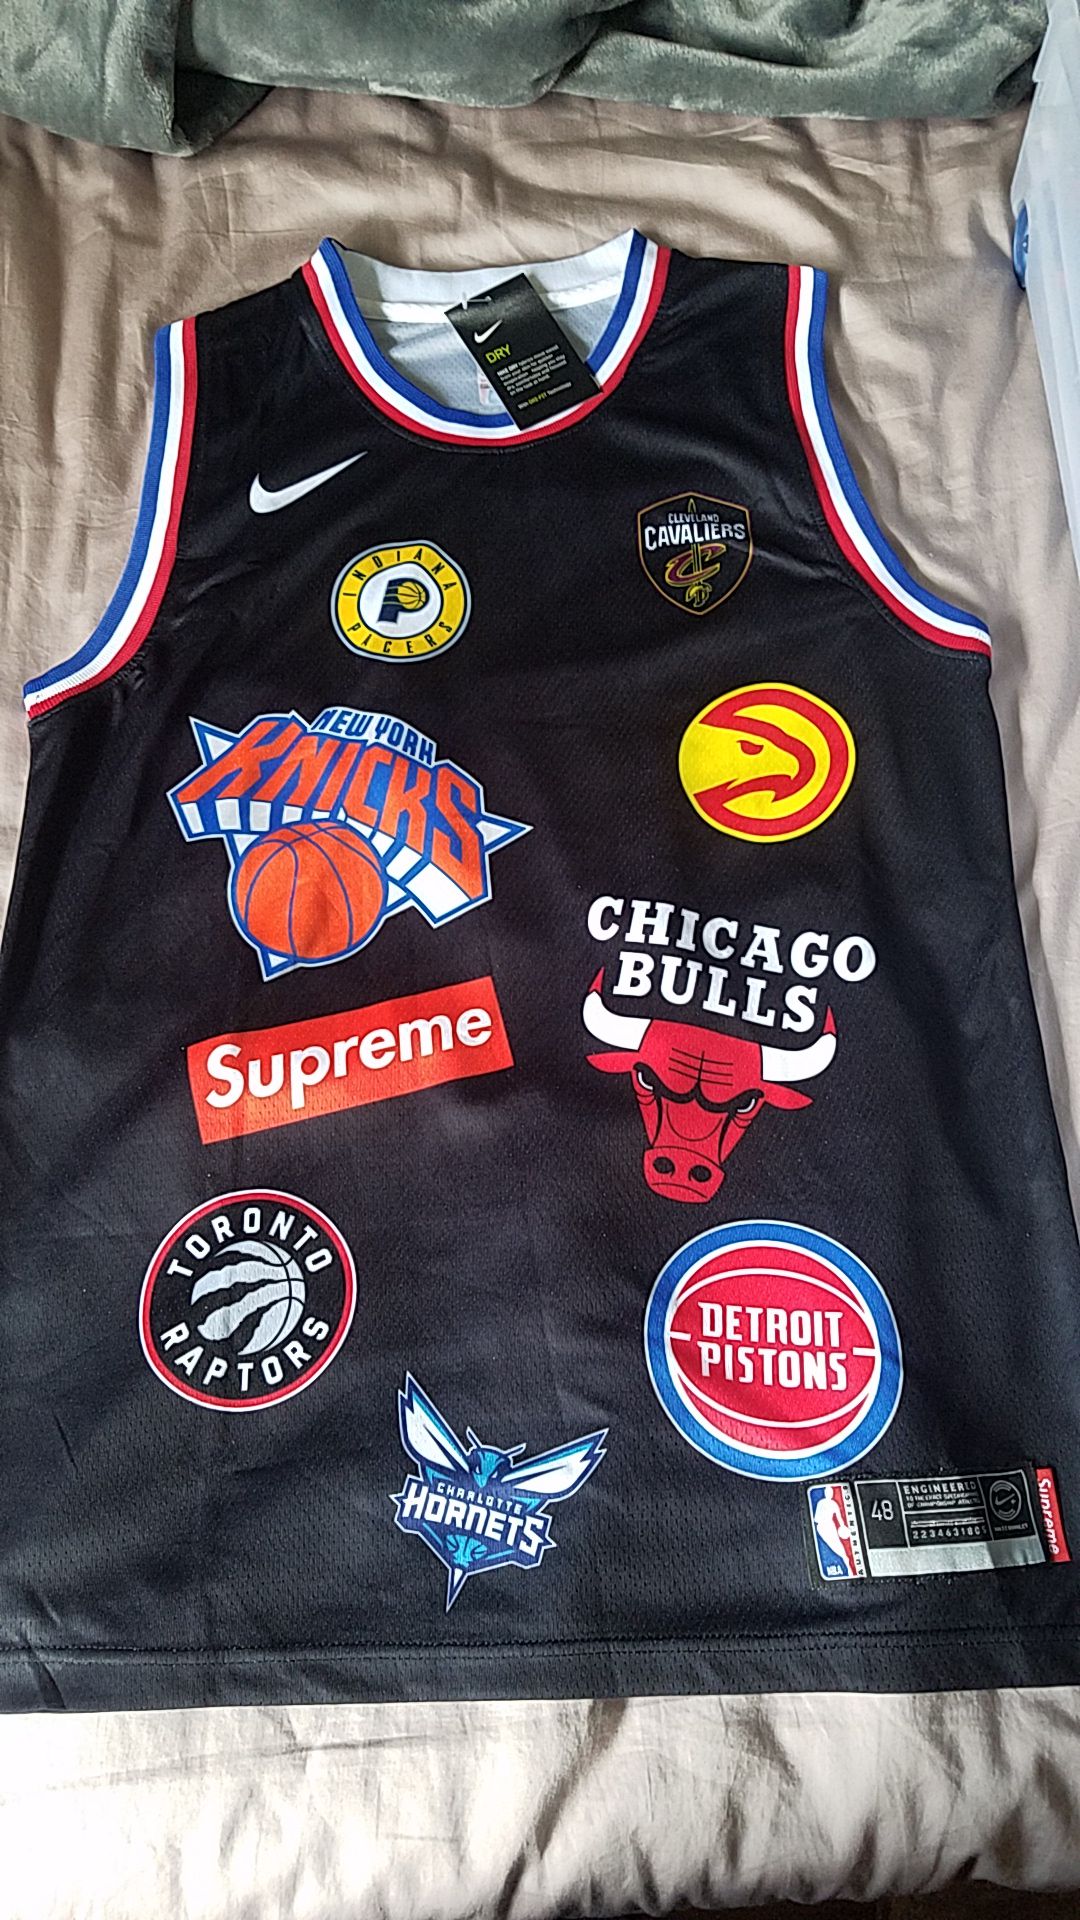 Supreme nba Jersey for Sale in Duluth, GA - OfferUp